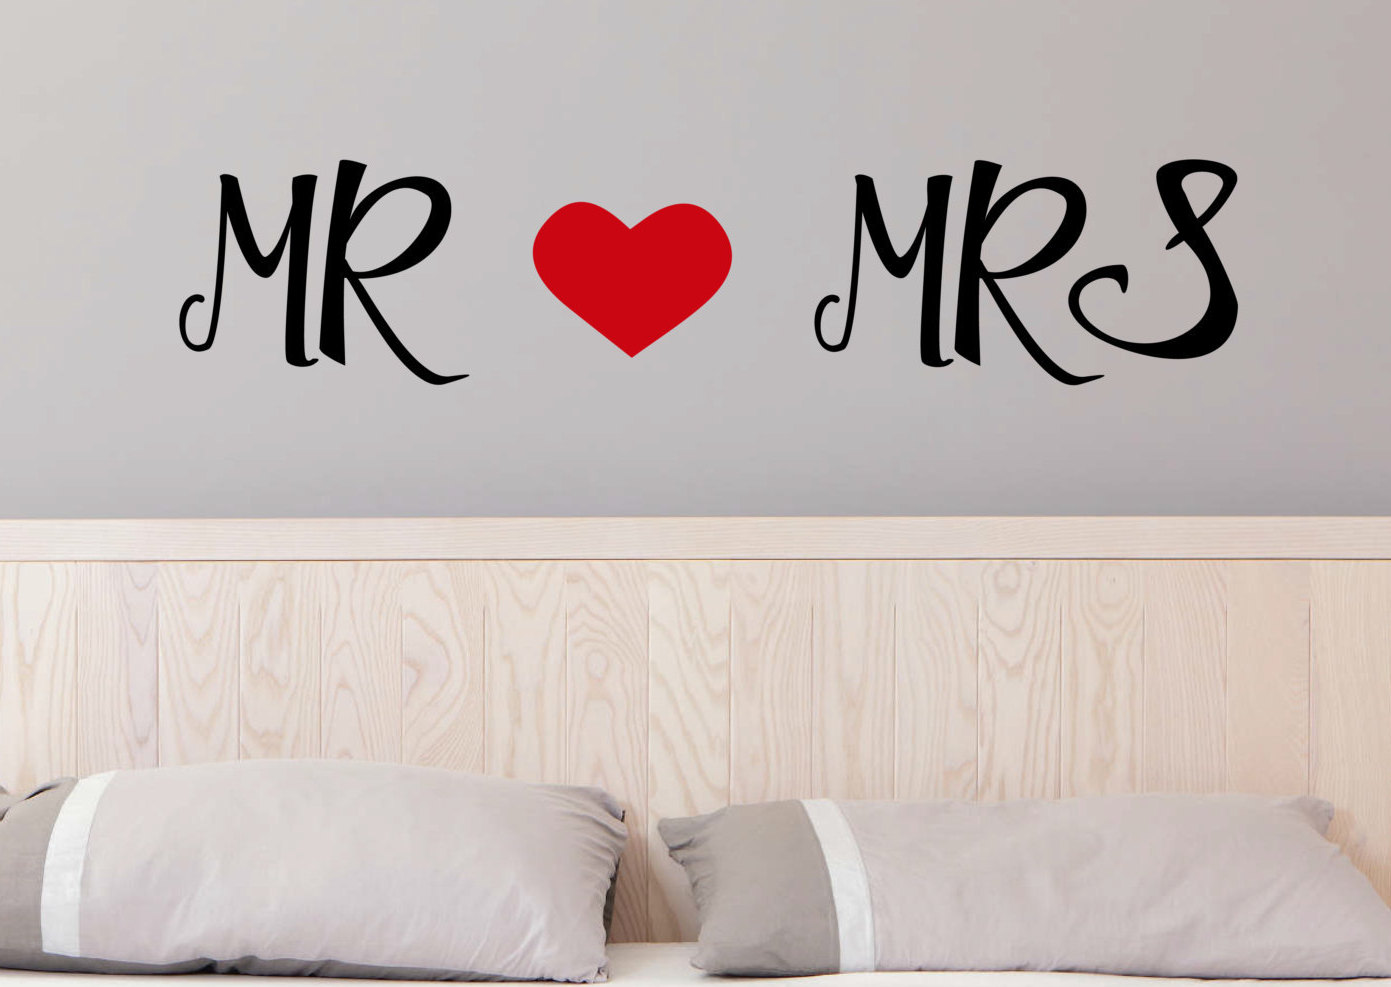 Mr and Mrs Wall Stickers - His and Her Wall Stickers - Bedroom Wall Stick.....